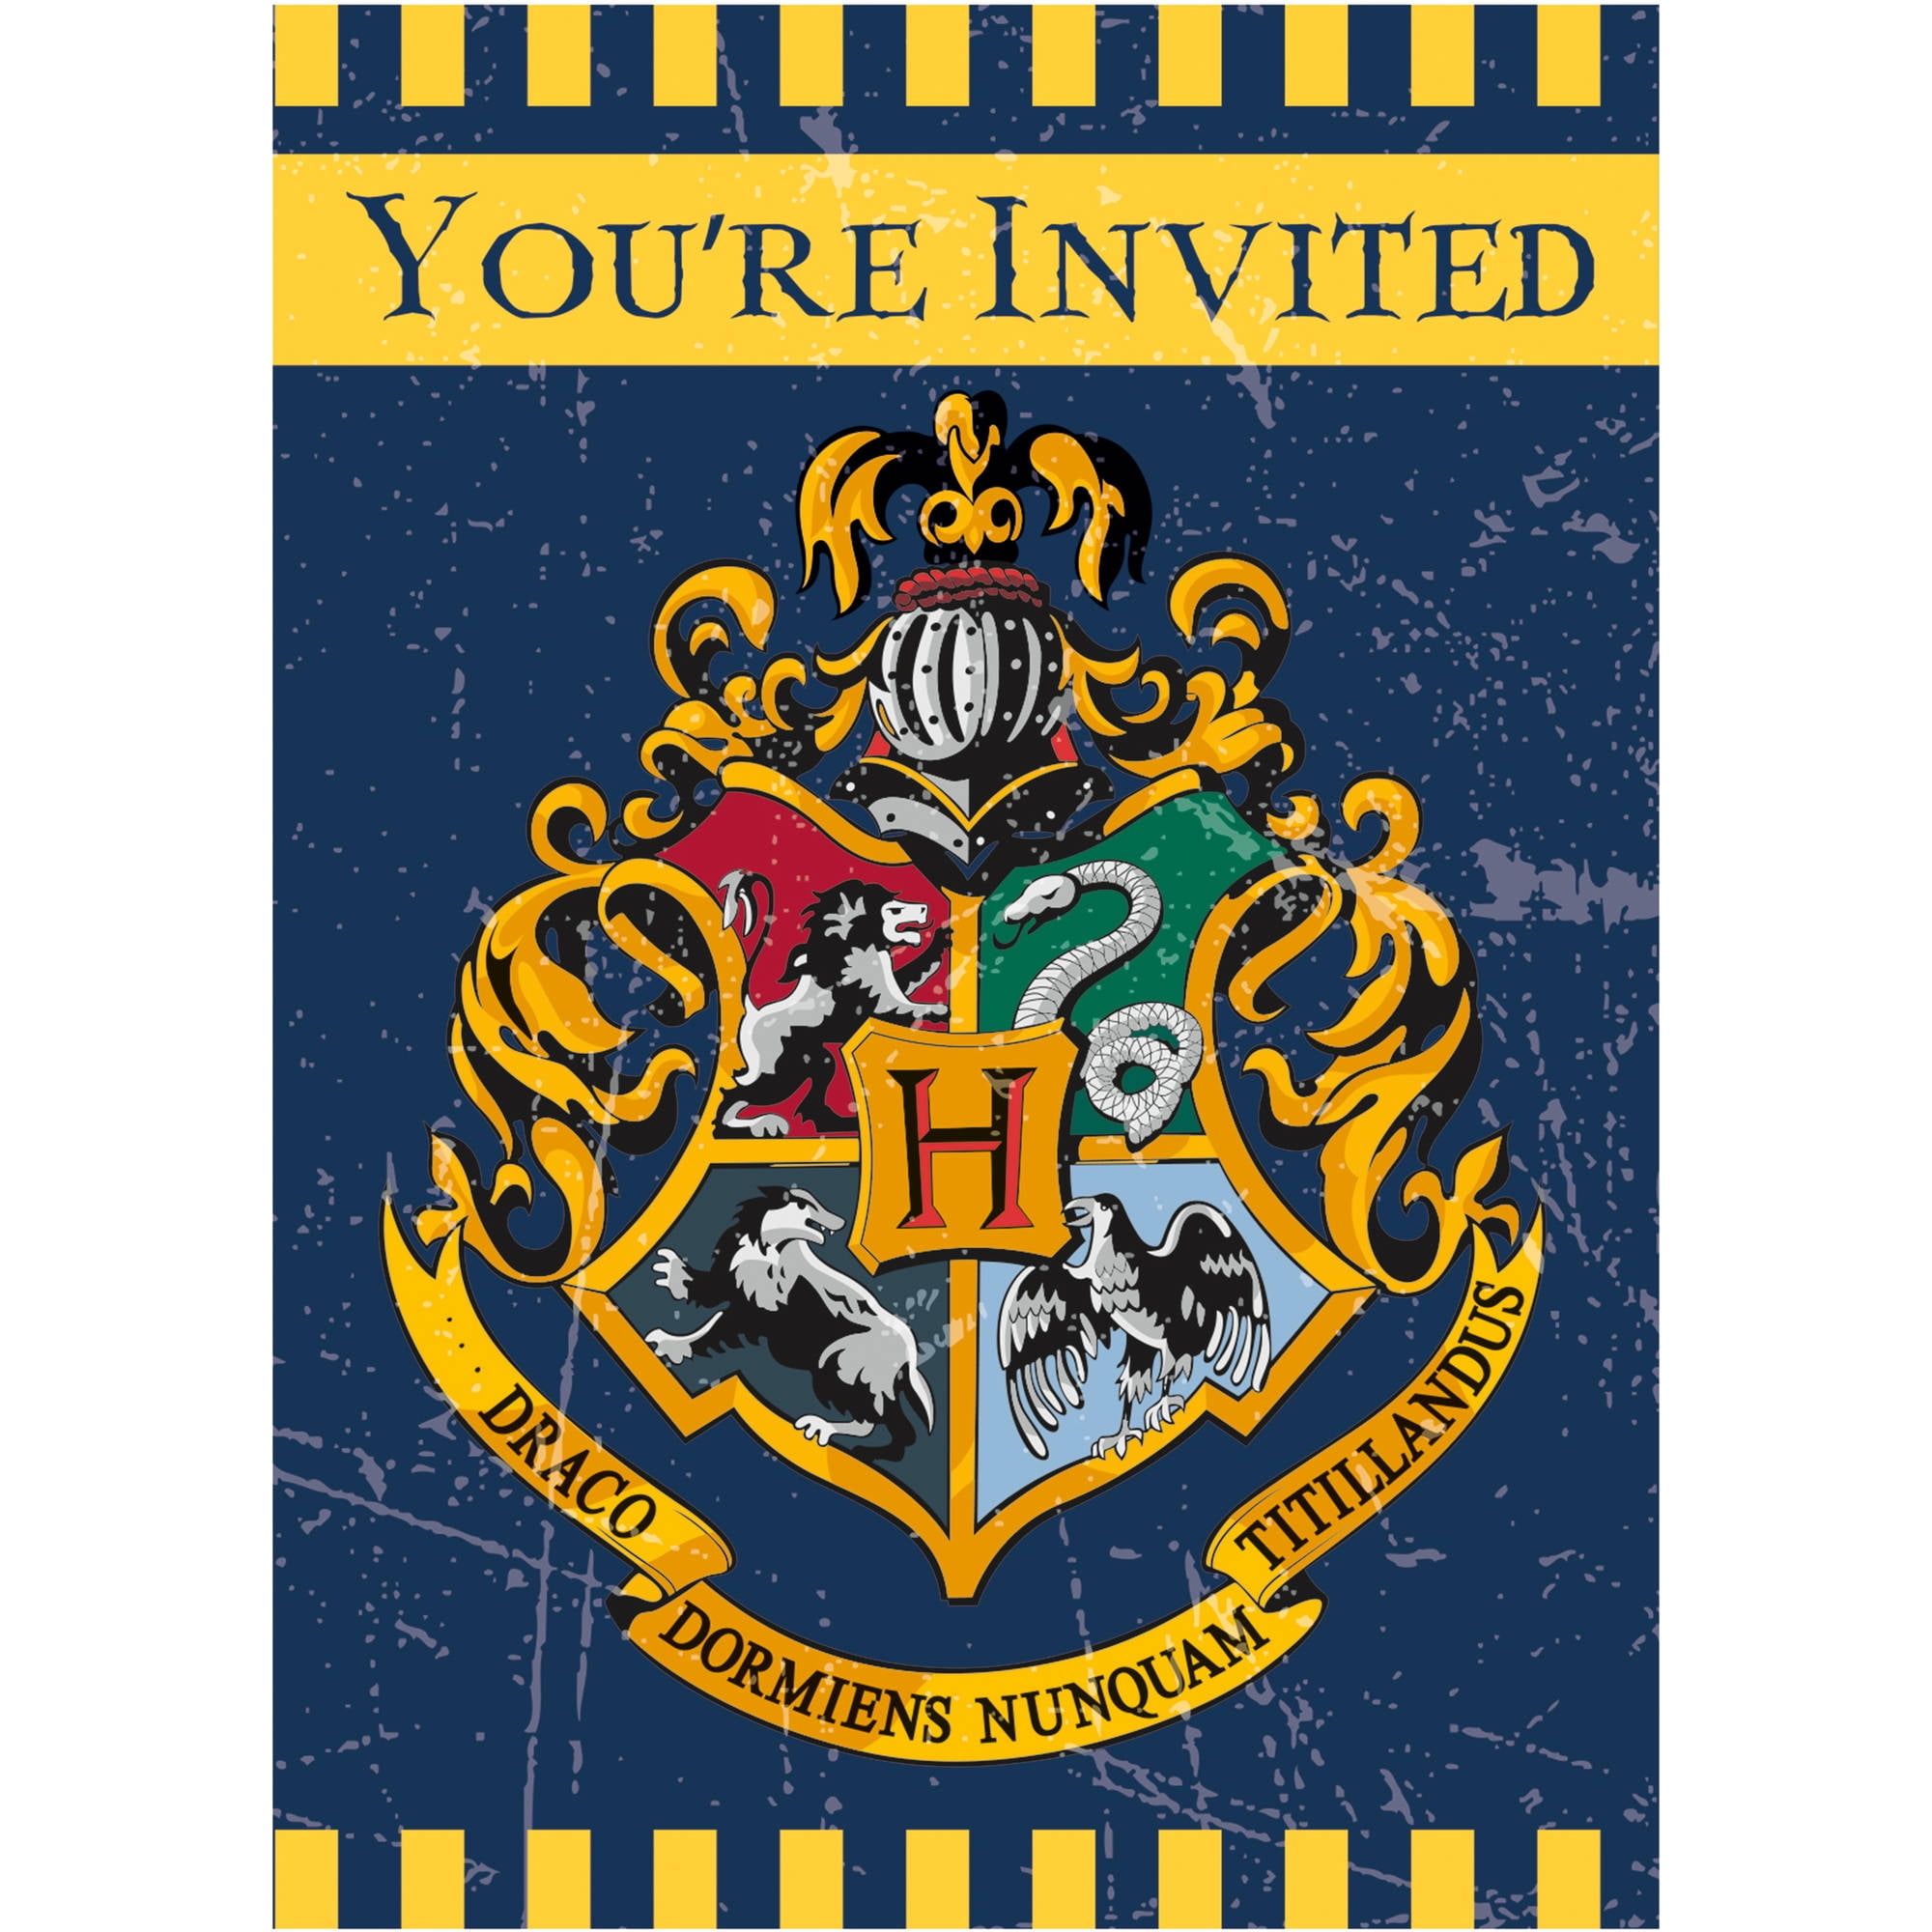 Party City Custom Harry Potter Photo Invitations Size 4in x 6in | Party Supplies